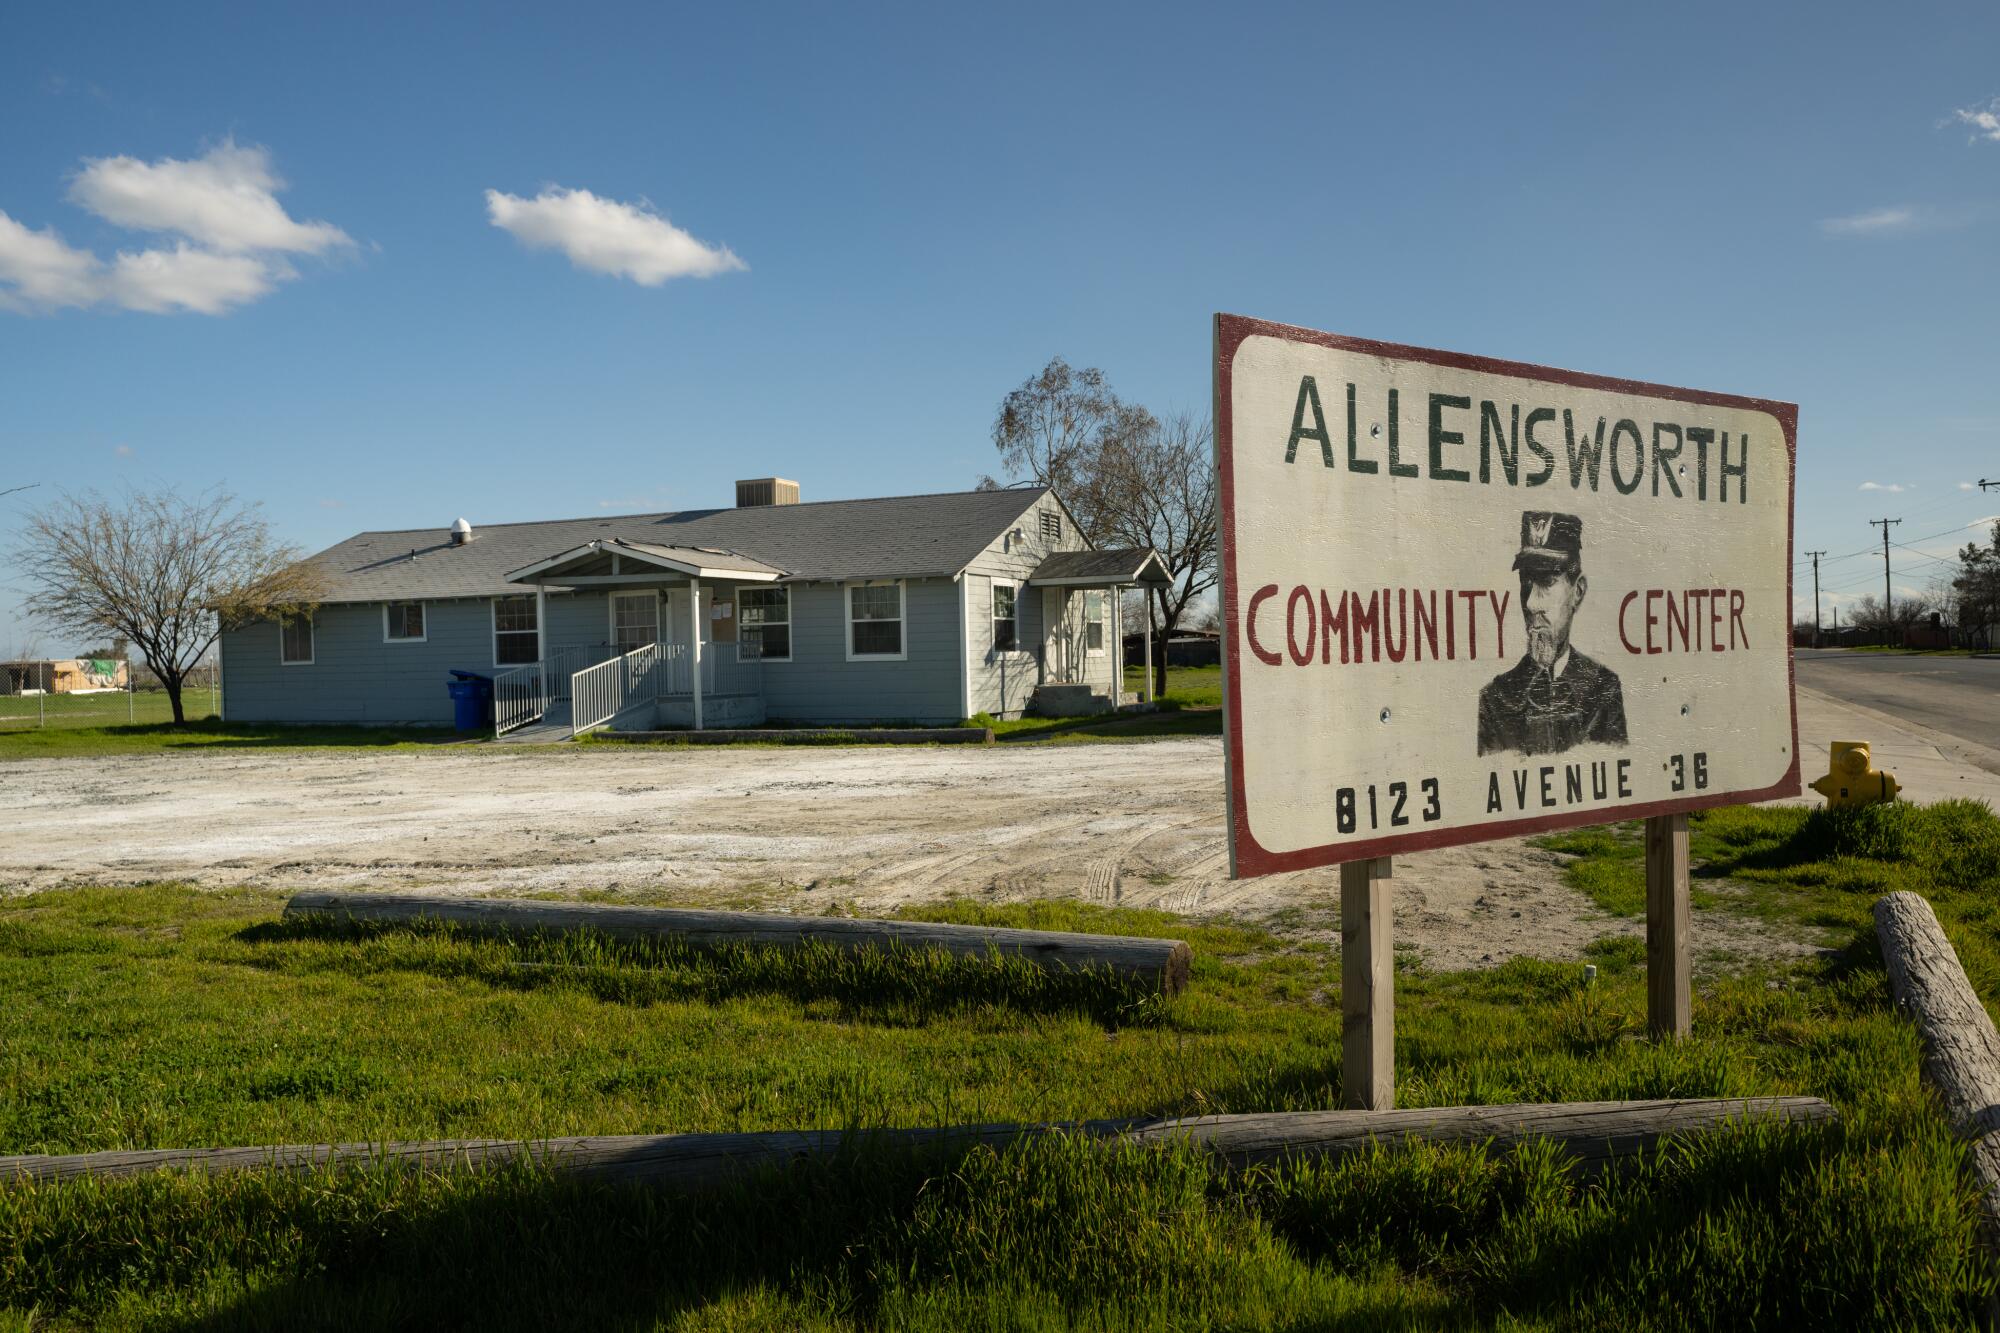 The Allensworth Community Center in the small city of Allensworth.